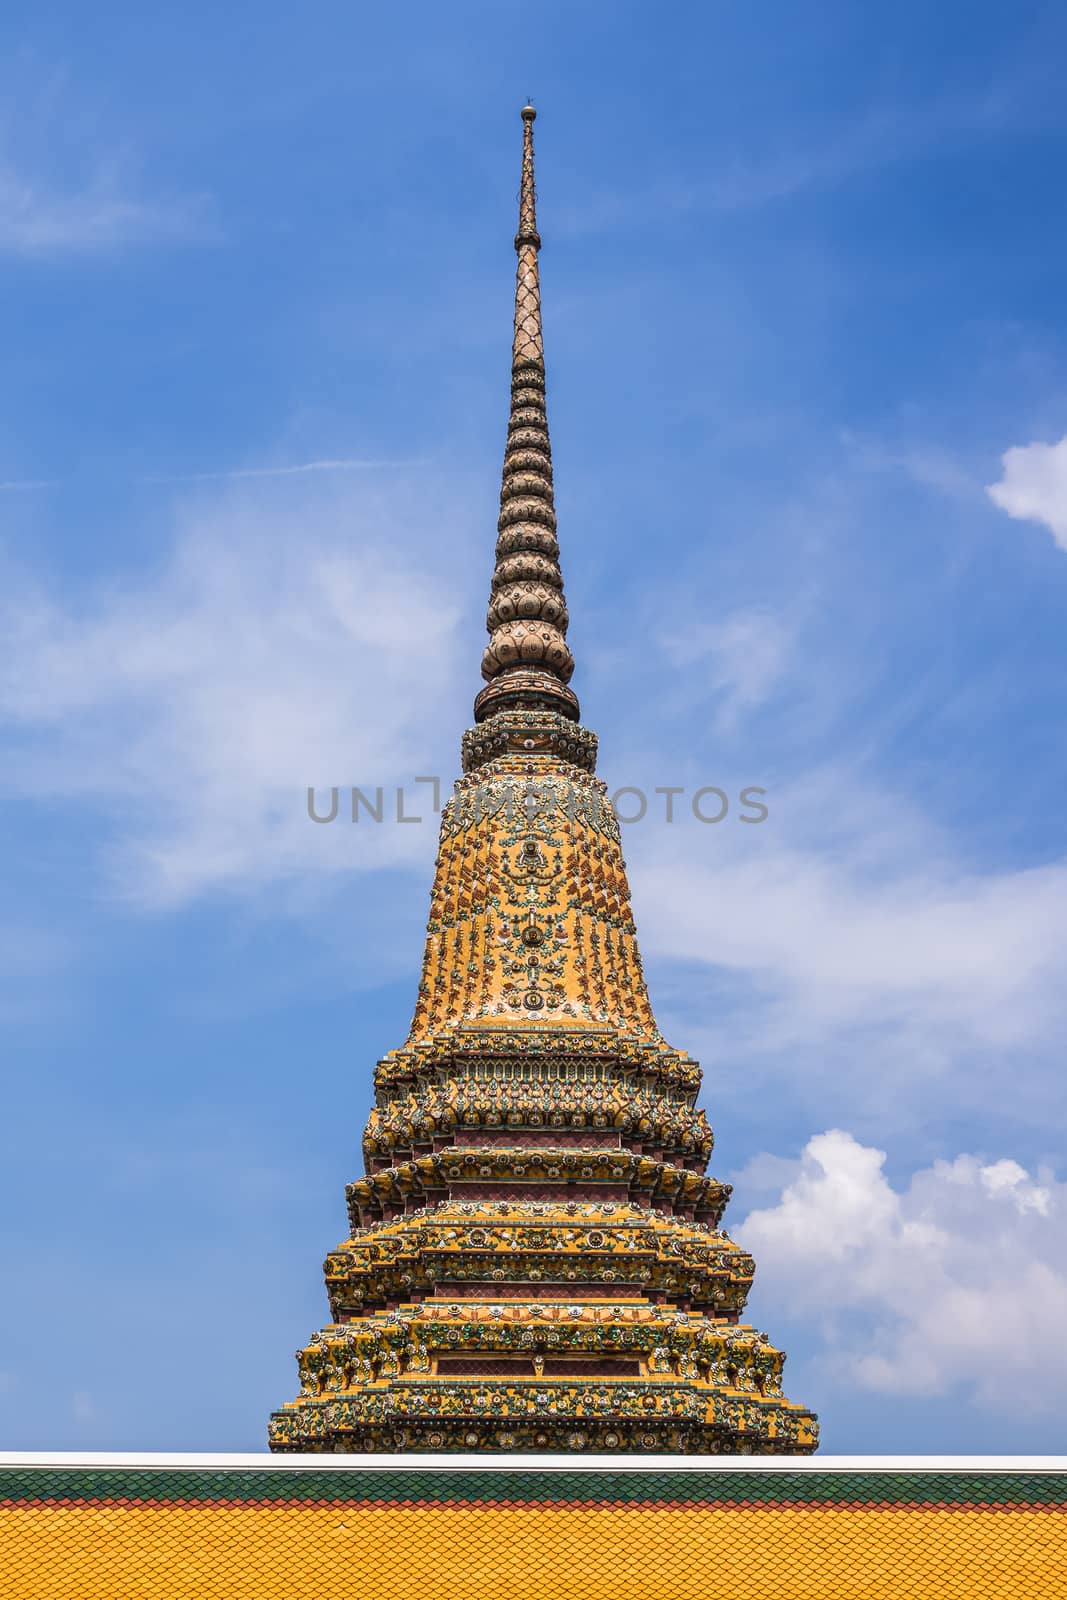 Part of the stupa in the complex of Wat Pho, the Temple of the Reclining Buddha in Bangkok, Thailand.